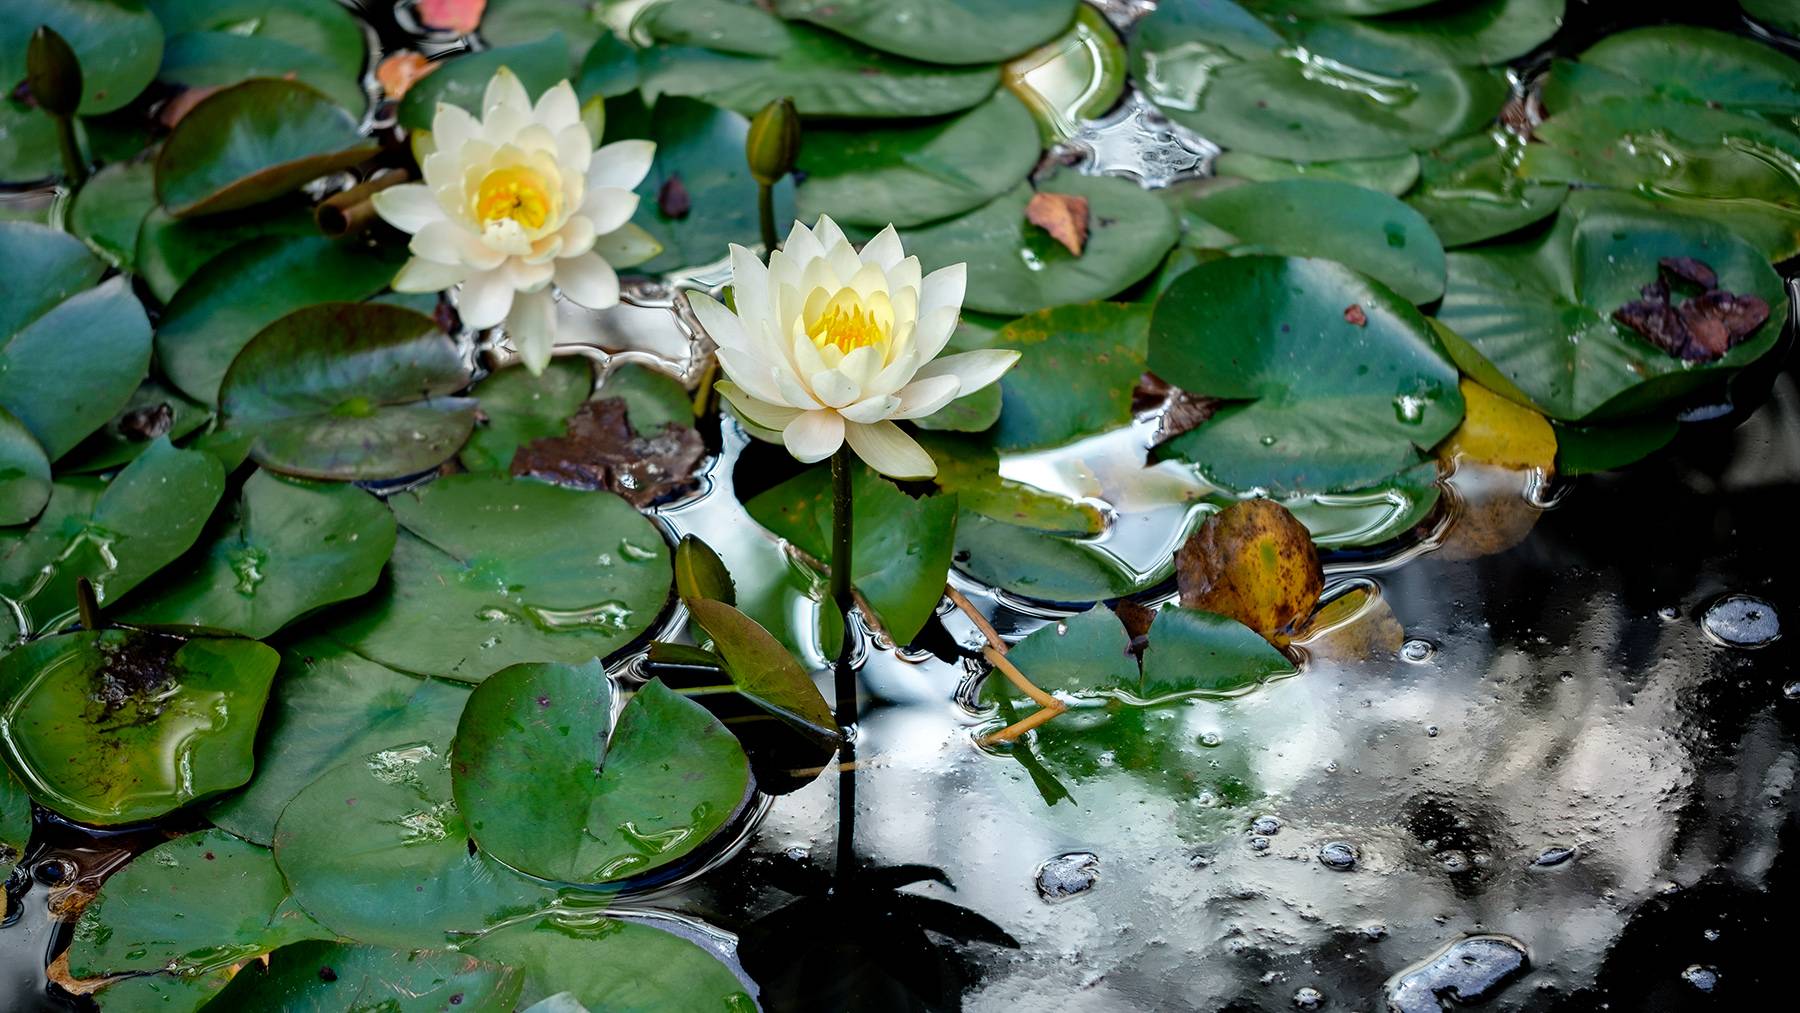 Flowers bloom among lily pads in a small on-campus pond.